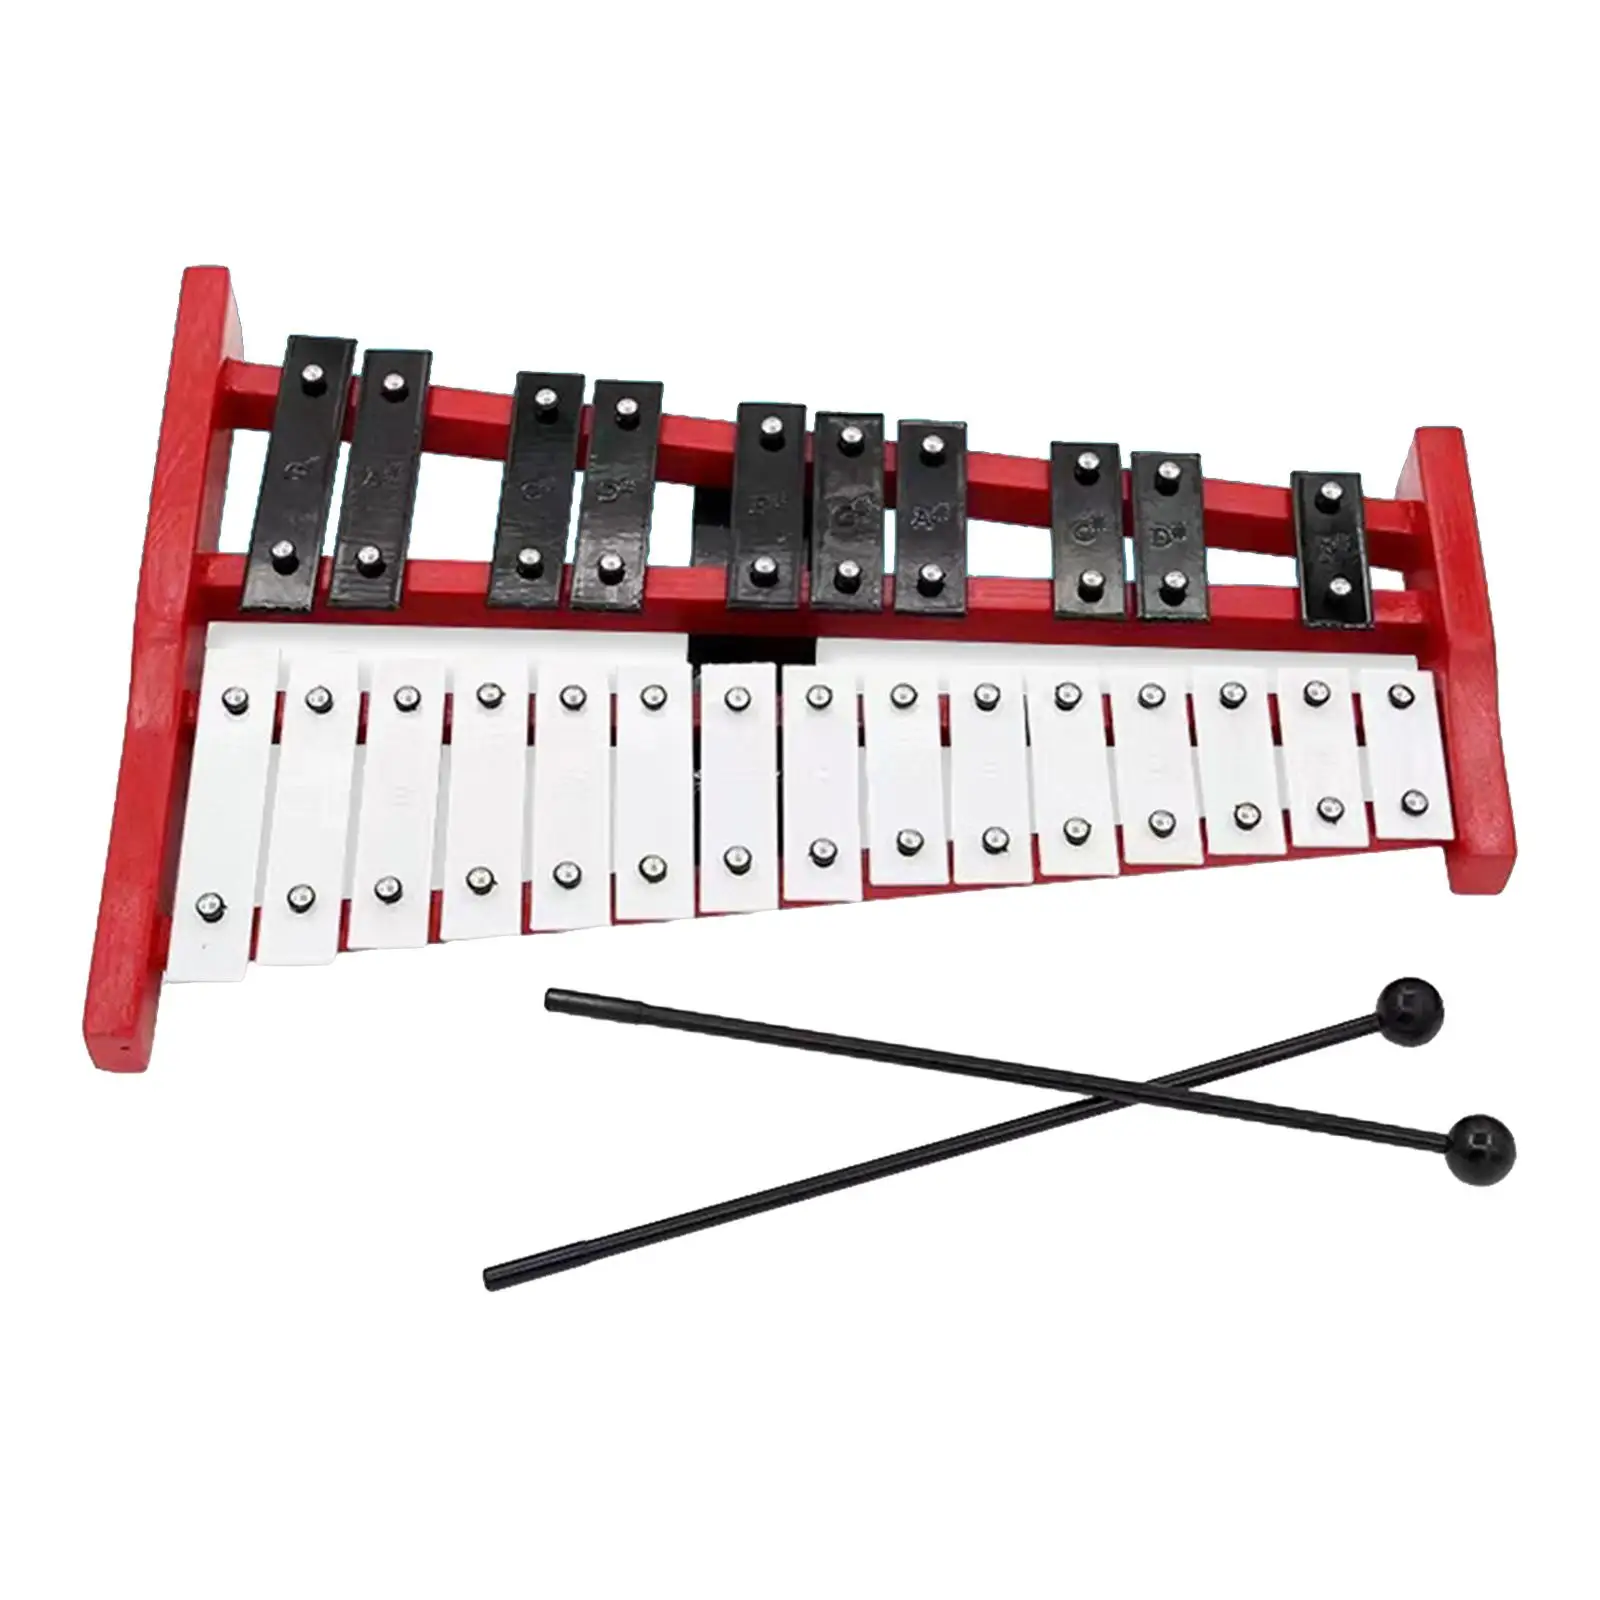 Glockenspiel Xylophone Kids Music Motor Skill Wooden Percussion Toys 25 Note for School Orchestras Live Performance